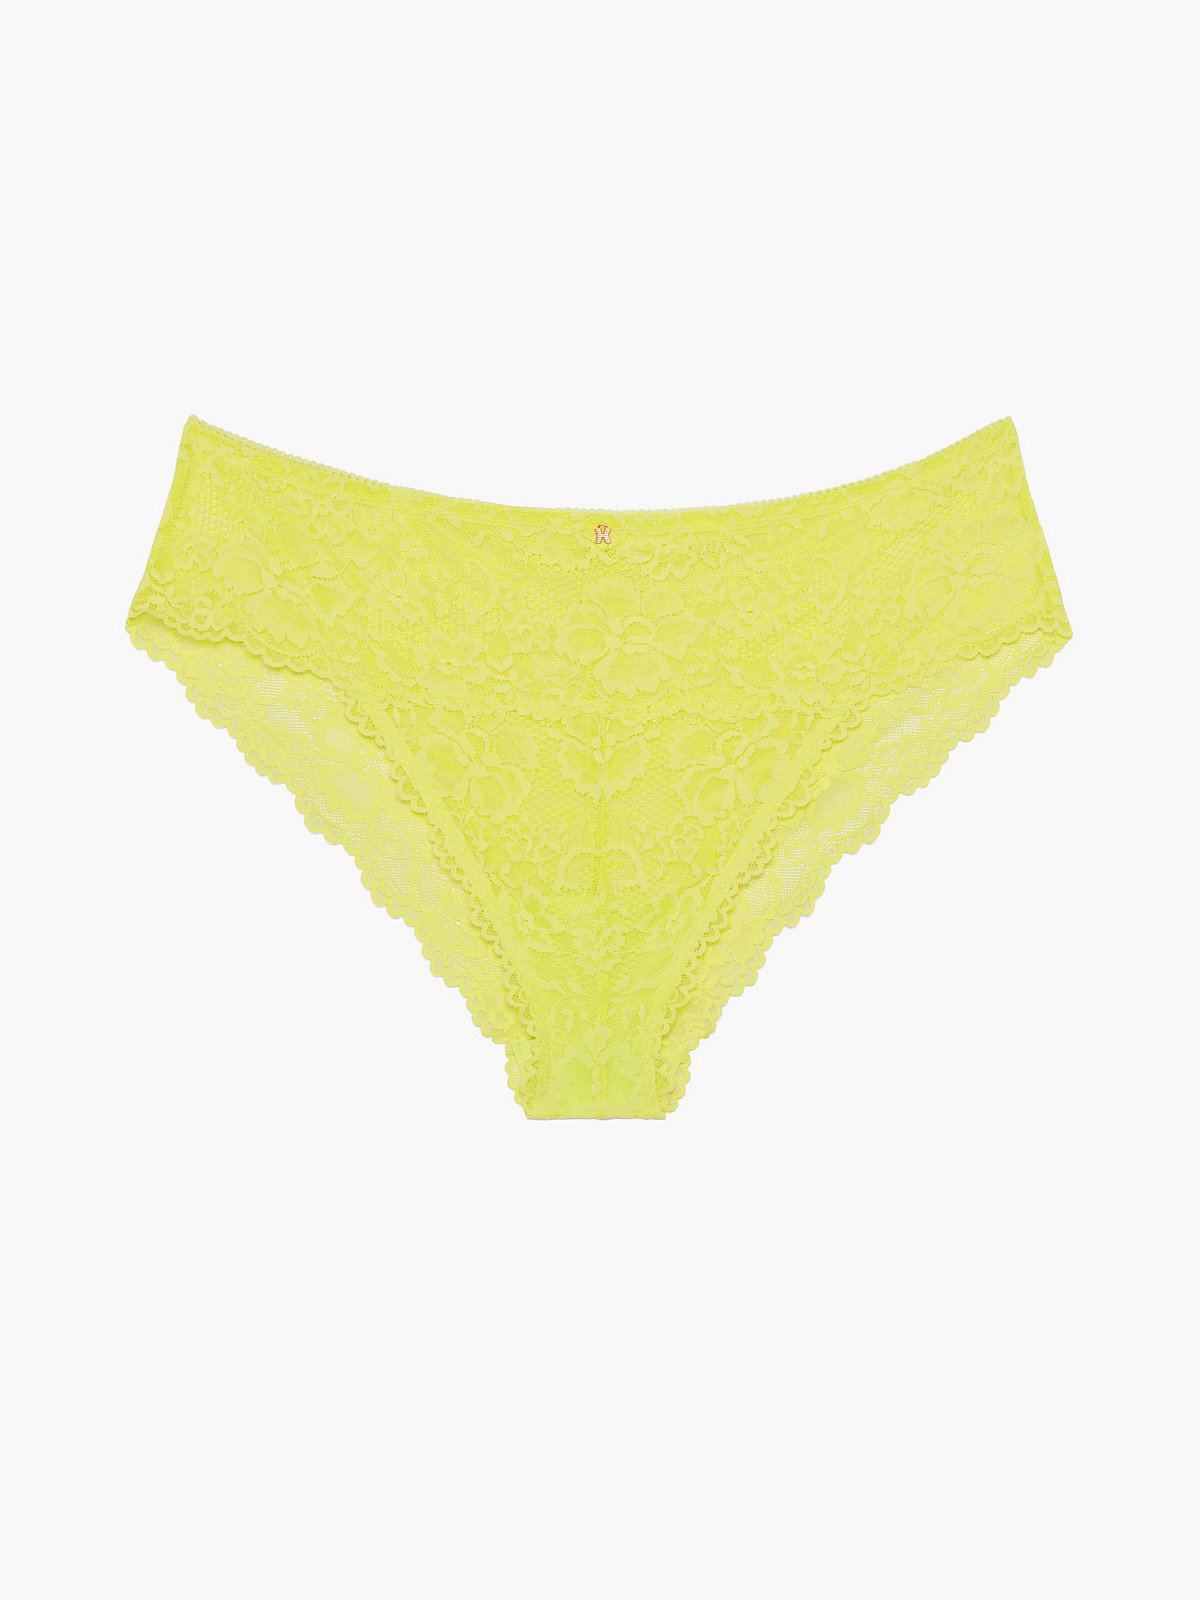 Floral Lace Cheeky Panty in Yellow | SAVAGE X FENTY